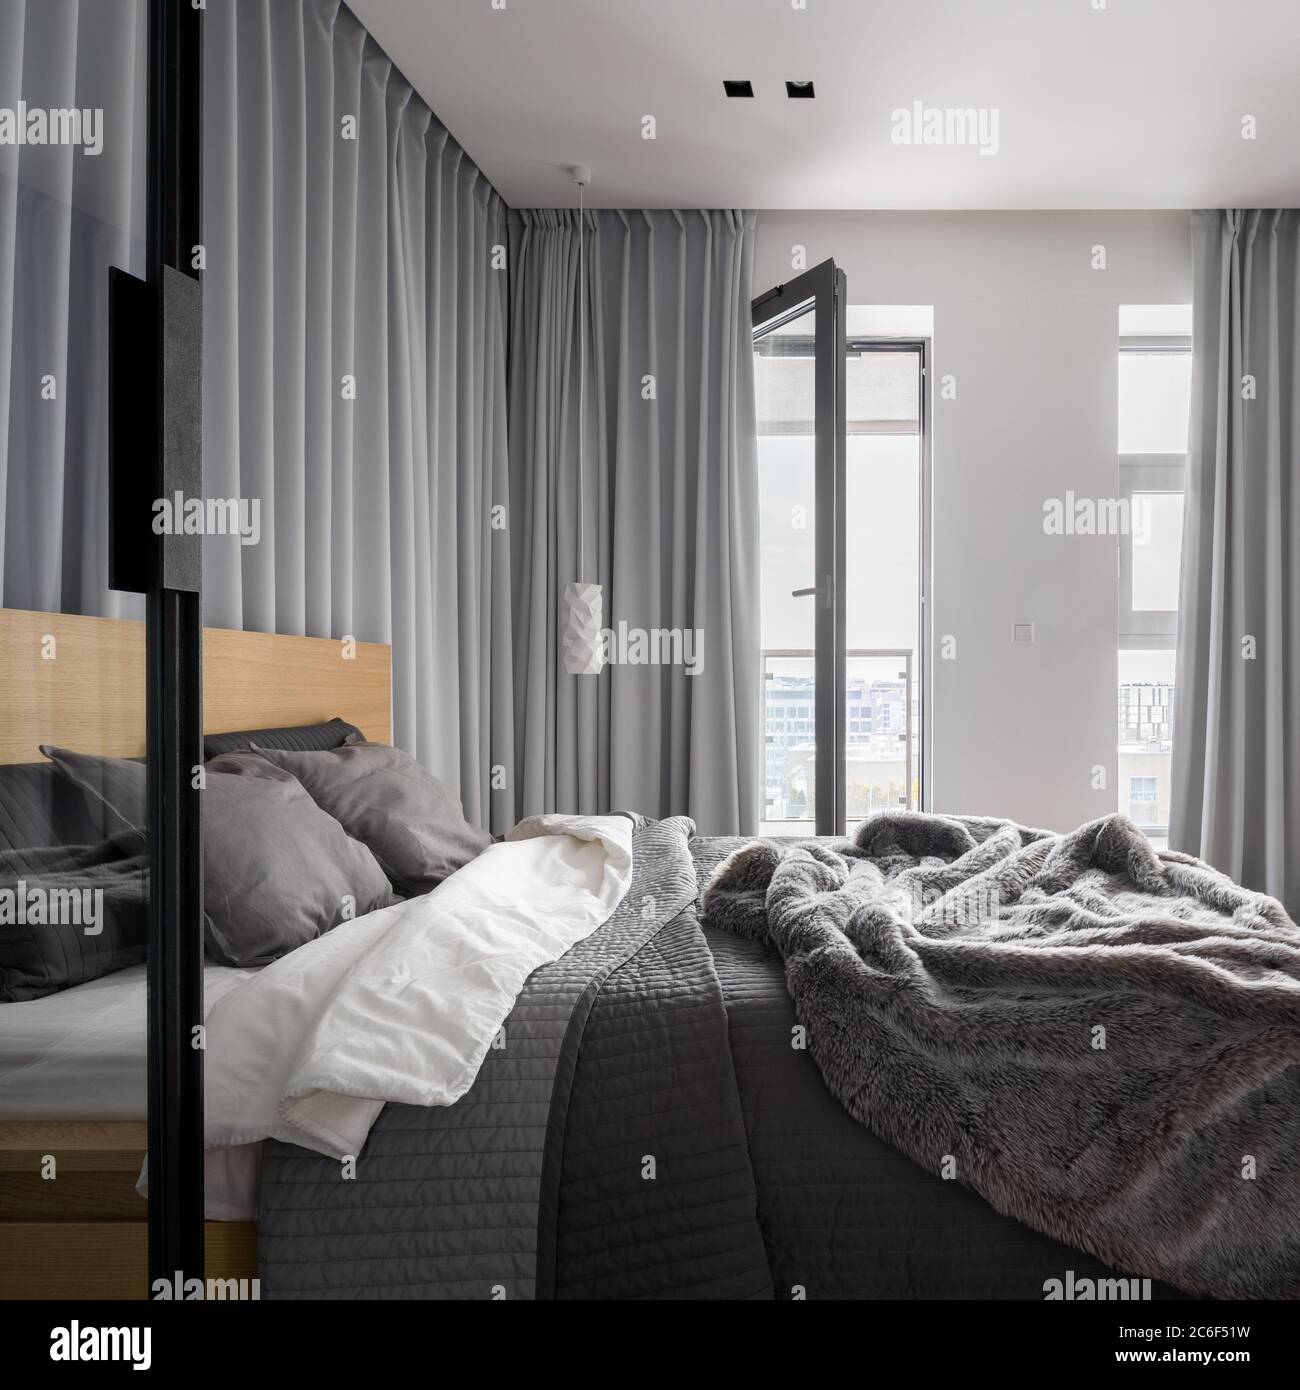 Luxurious bedroom with double bed and gray window curtains Stock Photo